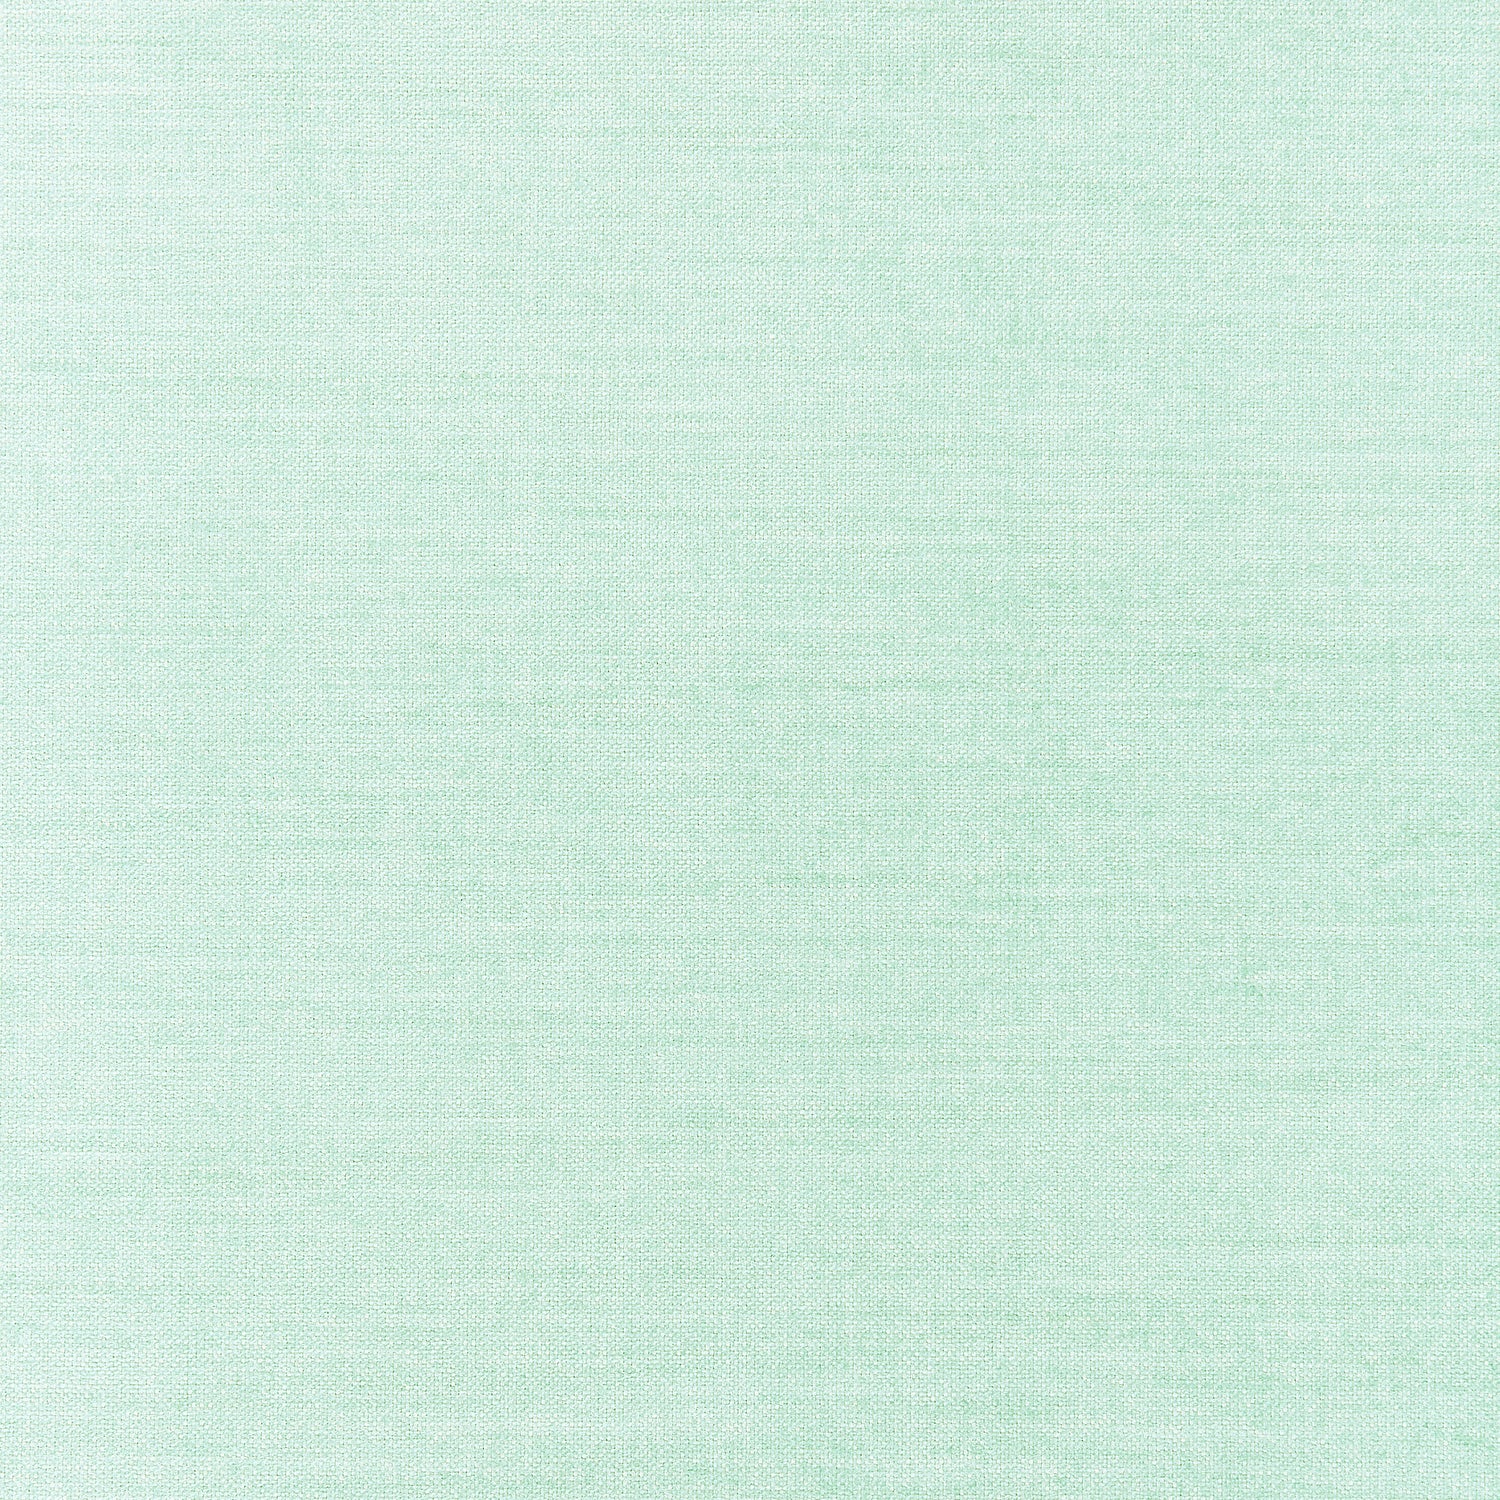 Aura fabric in aqua color - pattern number W80279 - by Thibaut in the Kaleidoscope Fabrics collection